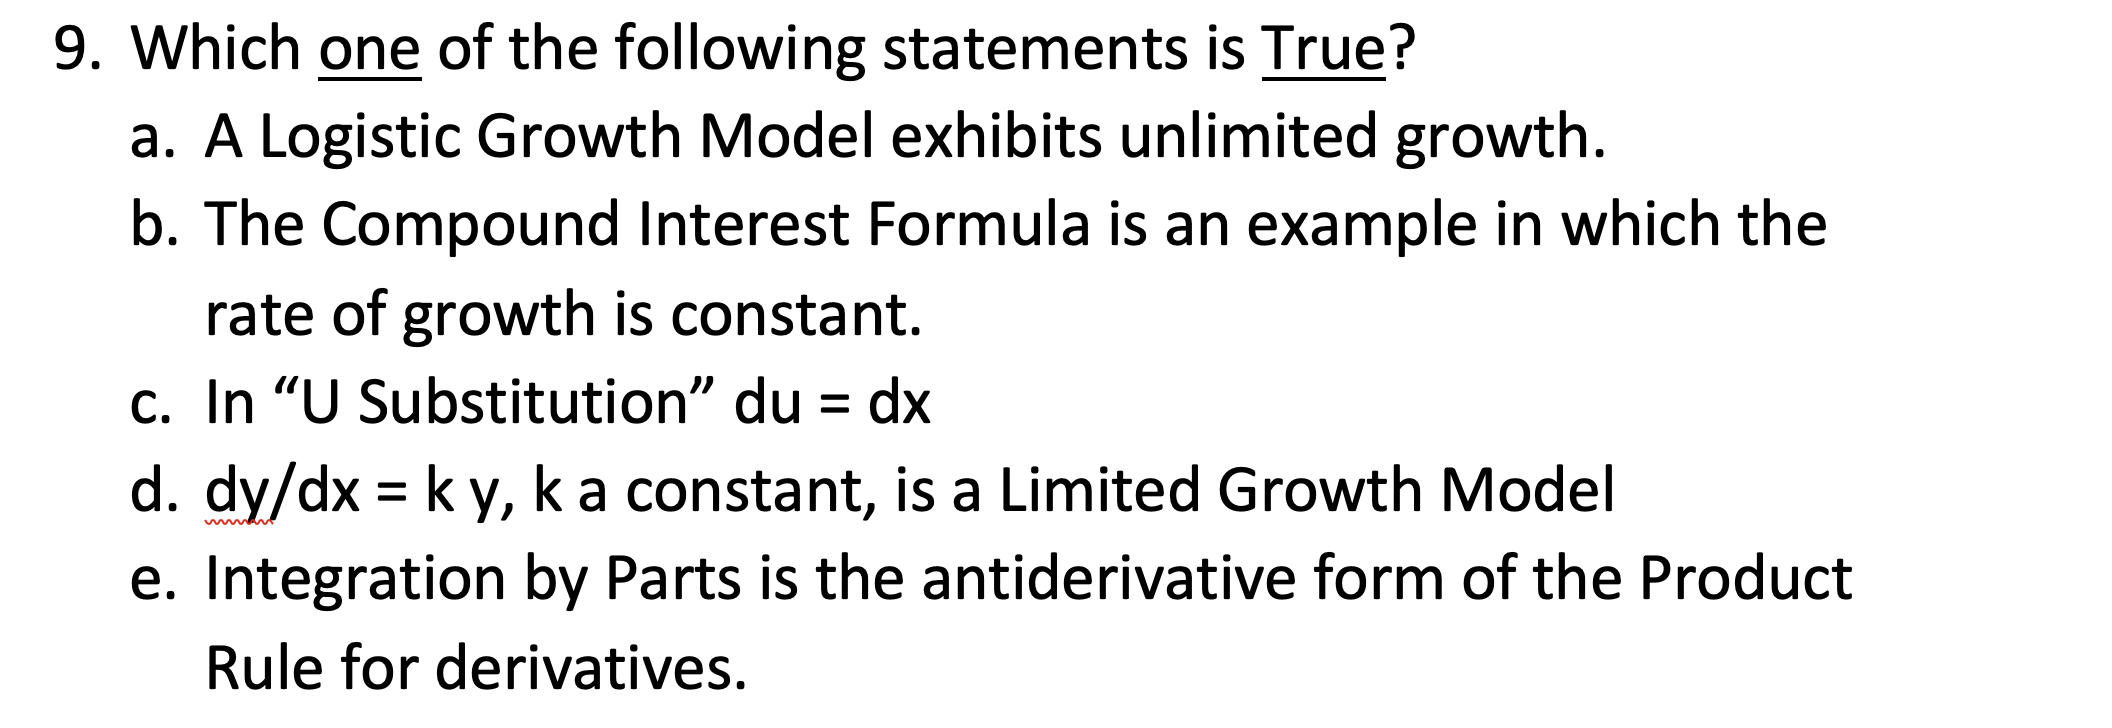 9. Which one of the following statements is True?
a. A Logistic Growth Model exhibits unlimited growth.
b. The Compound Interest Formula is an example in which the
rate of growth is constant.
c. In "U Substitution" du = dx
d. dy/dx = k y, ka constant, is a Limited Growth Model
e. Integration by Parts is the antiderivative form of the Product
%3D
Rule for derivatives.
